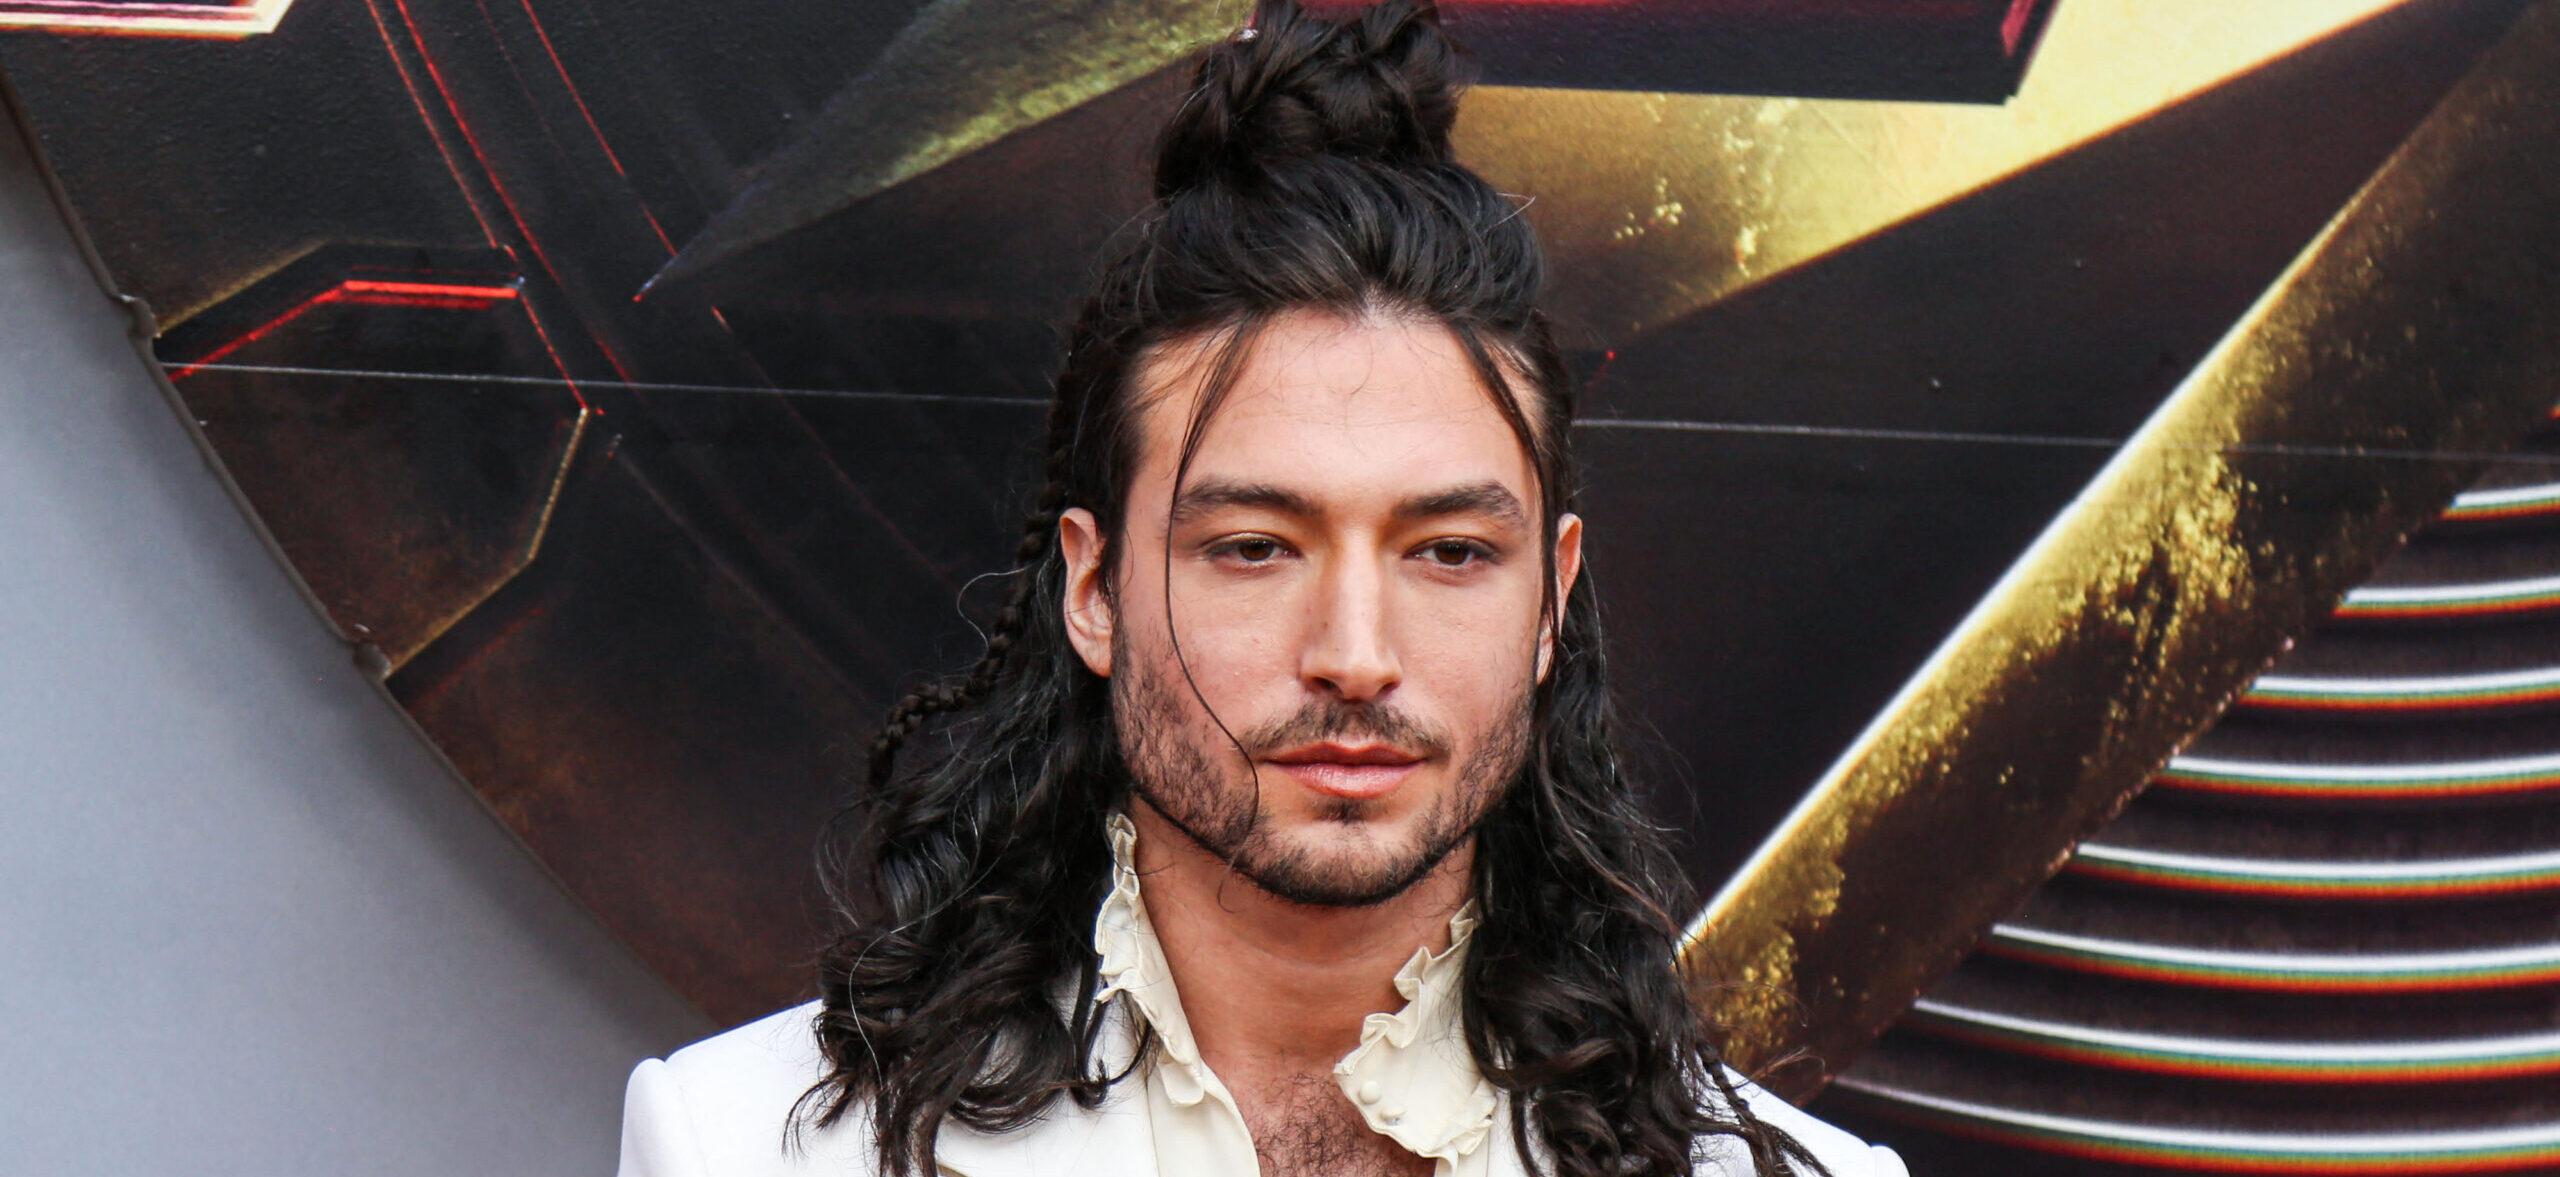 ‘The Flash’ Star Ezra Miller Is ‘Very Grateful’ Harassment Order Has Been Lifted